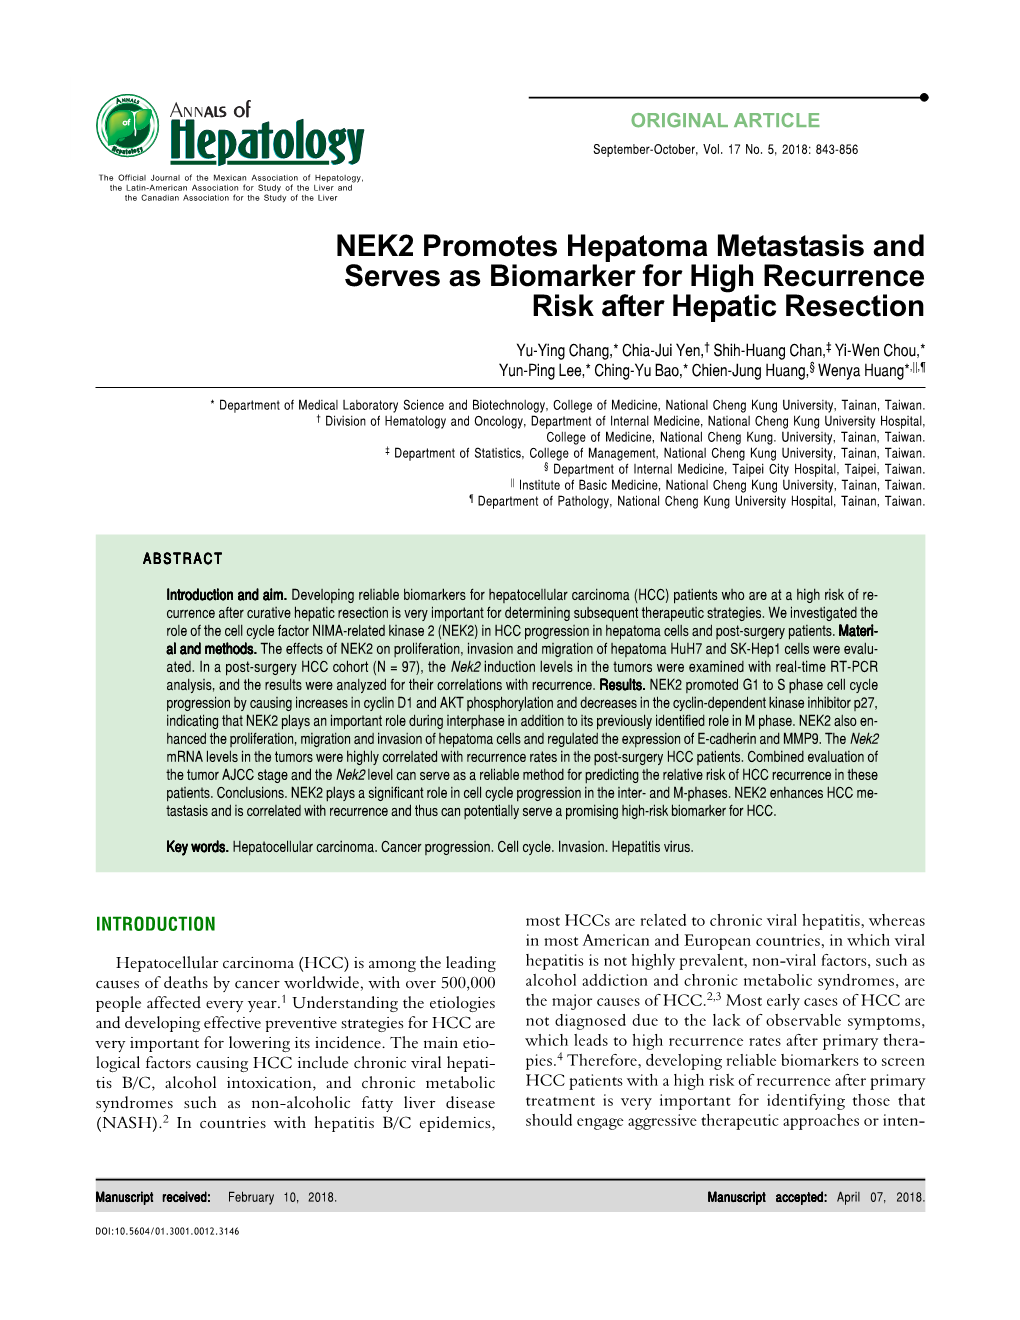 NEK2 Promotes Hepatoma Metastasis and Serves As Biomarker for High Recurrence Risk After Hepatic Resection